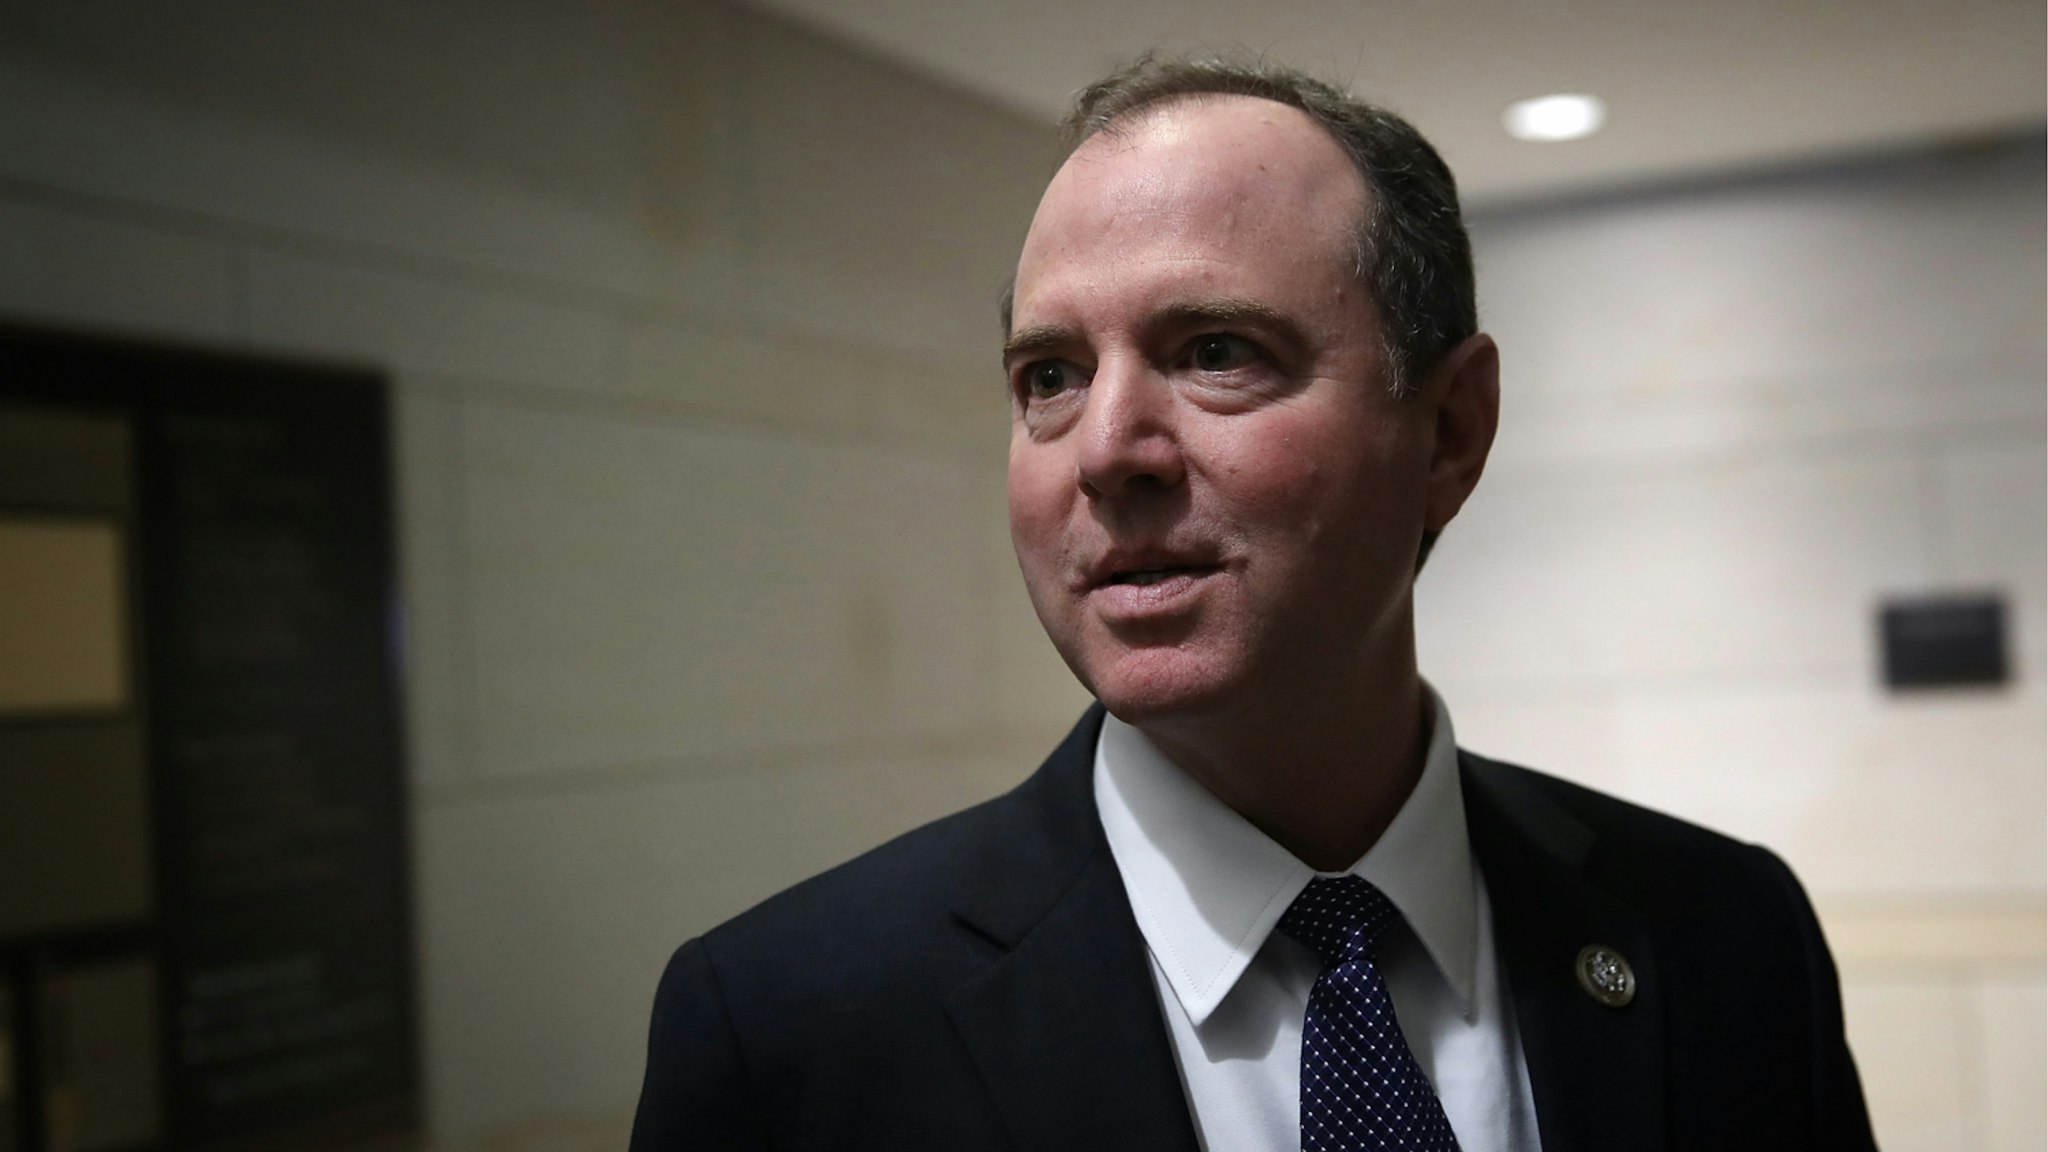 Rep. Adam Schiff (D-CA), ranking member of the House Permanent Select Committee on Intelligence, answers brief questions from the media while boarding an elevator at the U.S. Capitol February 5, 2018 in Washington, DC.